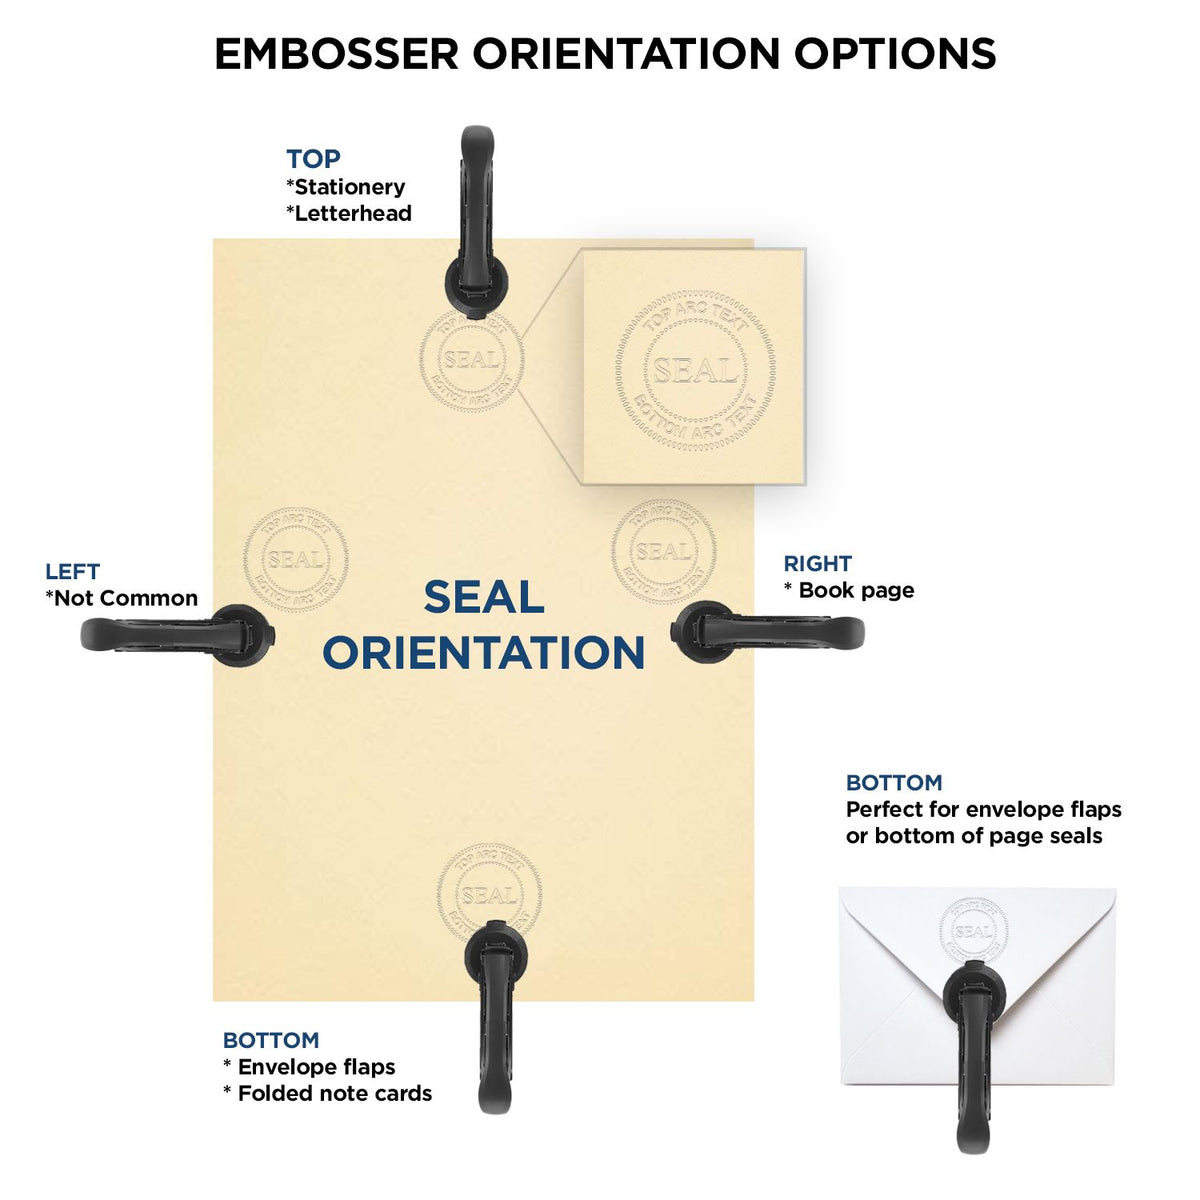 An infographic for the Long Reach Vermont PE Seal showing embosser orientation, this is showing examples of a top, bottom, right and left insert.